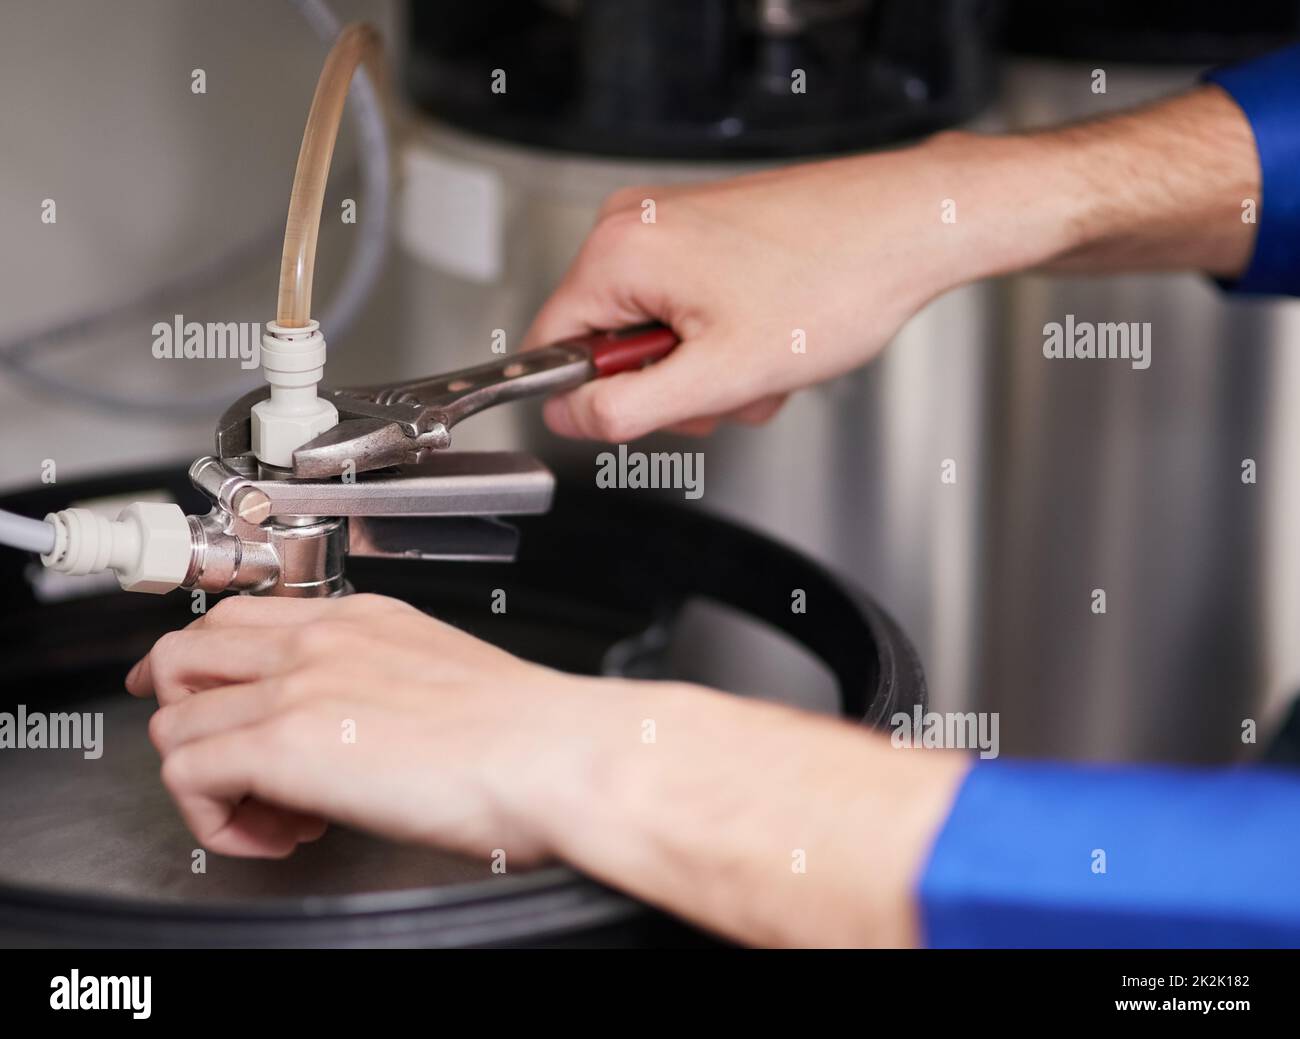 https://c8.alamy.com/comp/2K2K182/skilled-hands-working-on-your-water-heating-system-cropped-shot-of-a-handyman-repairing-a-pipe-on-a-water-heater-2K2K182.jpg